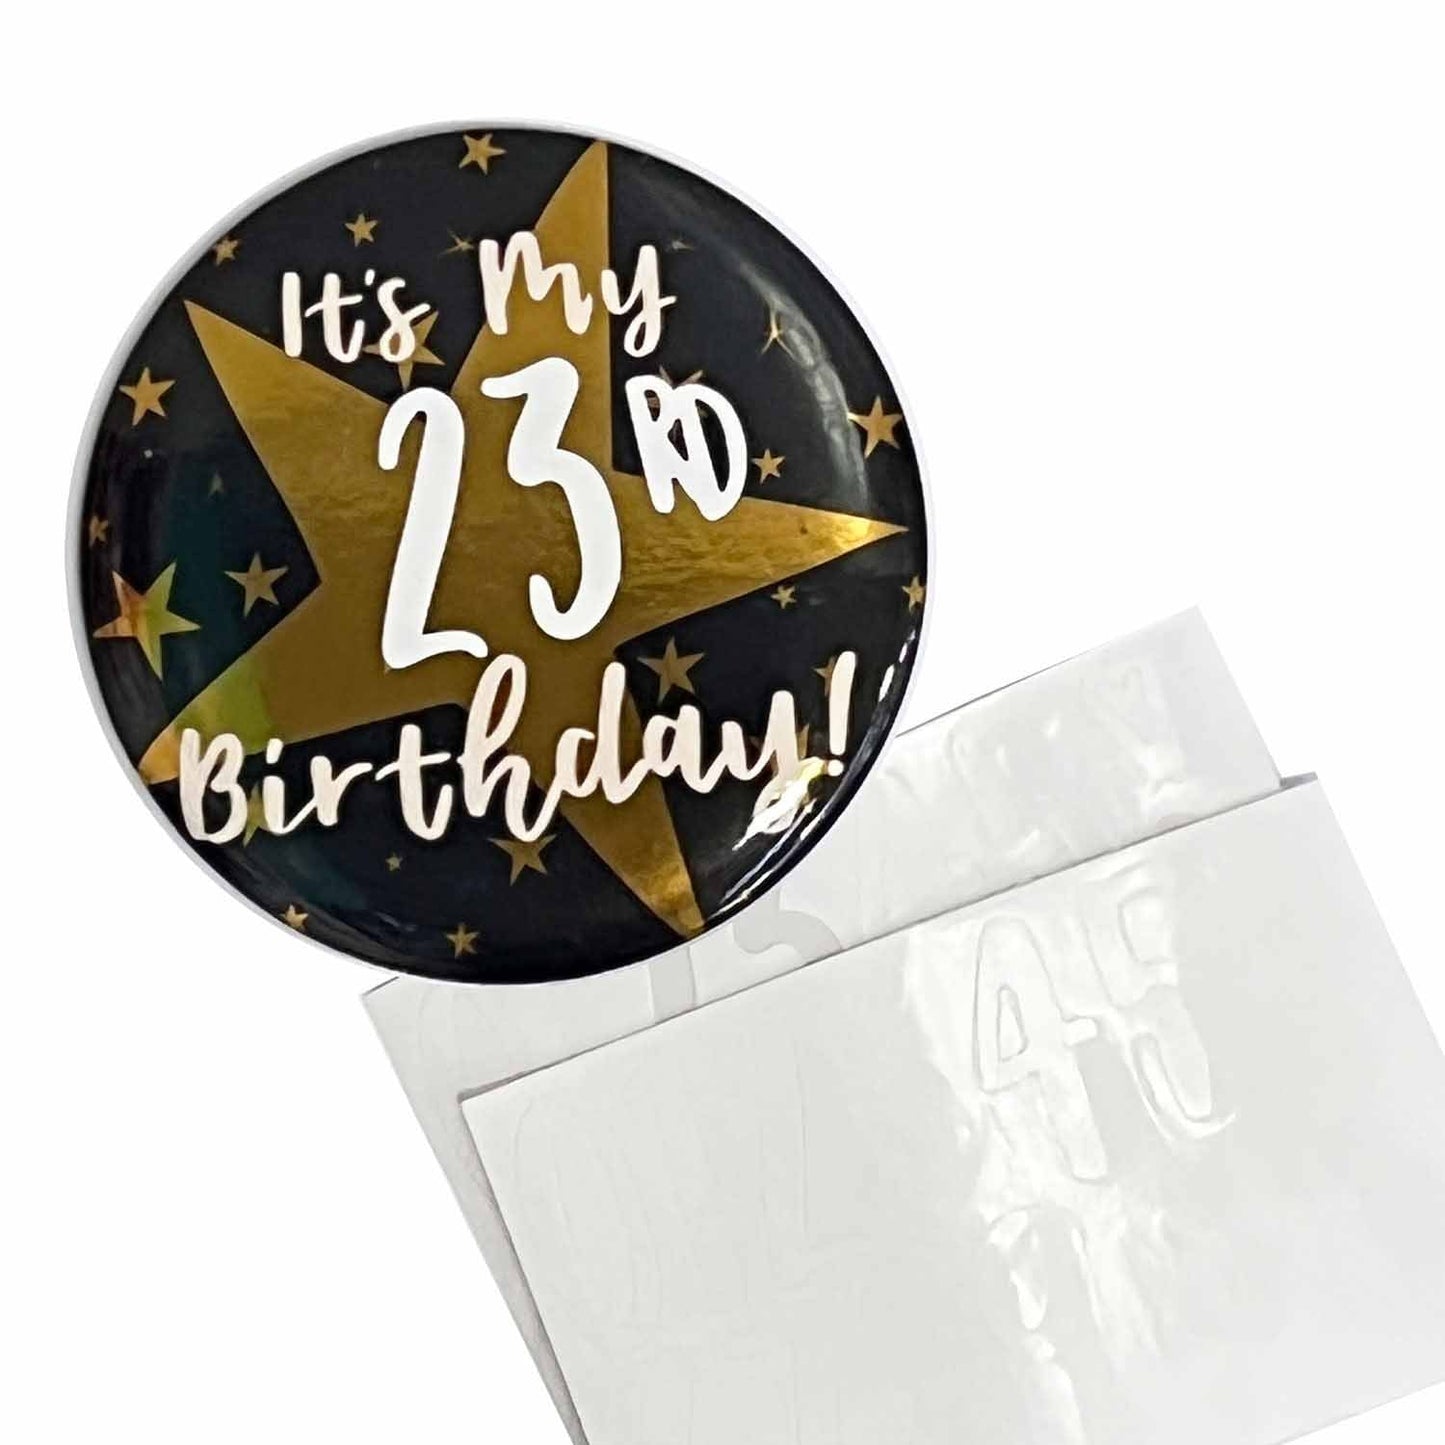 Add-an-Age Birthday Badge, 6cm. Comes with stick on numbers and letters